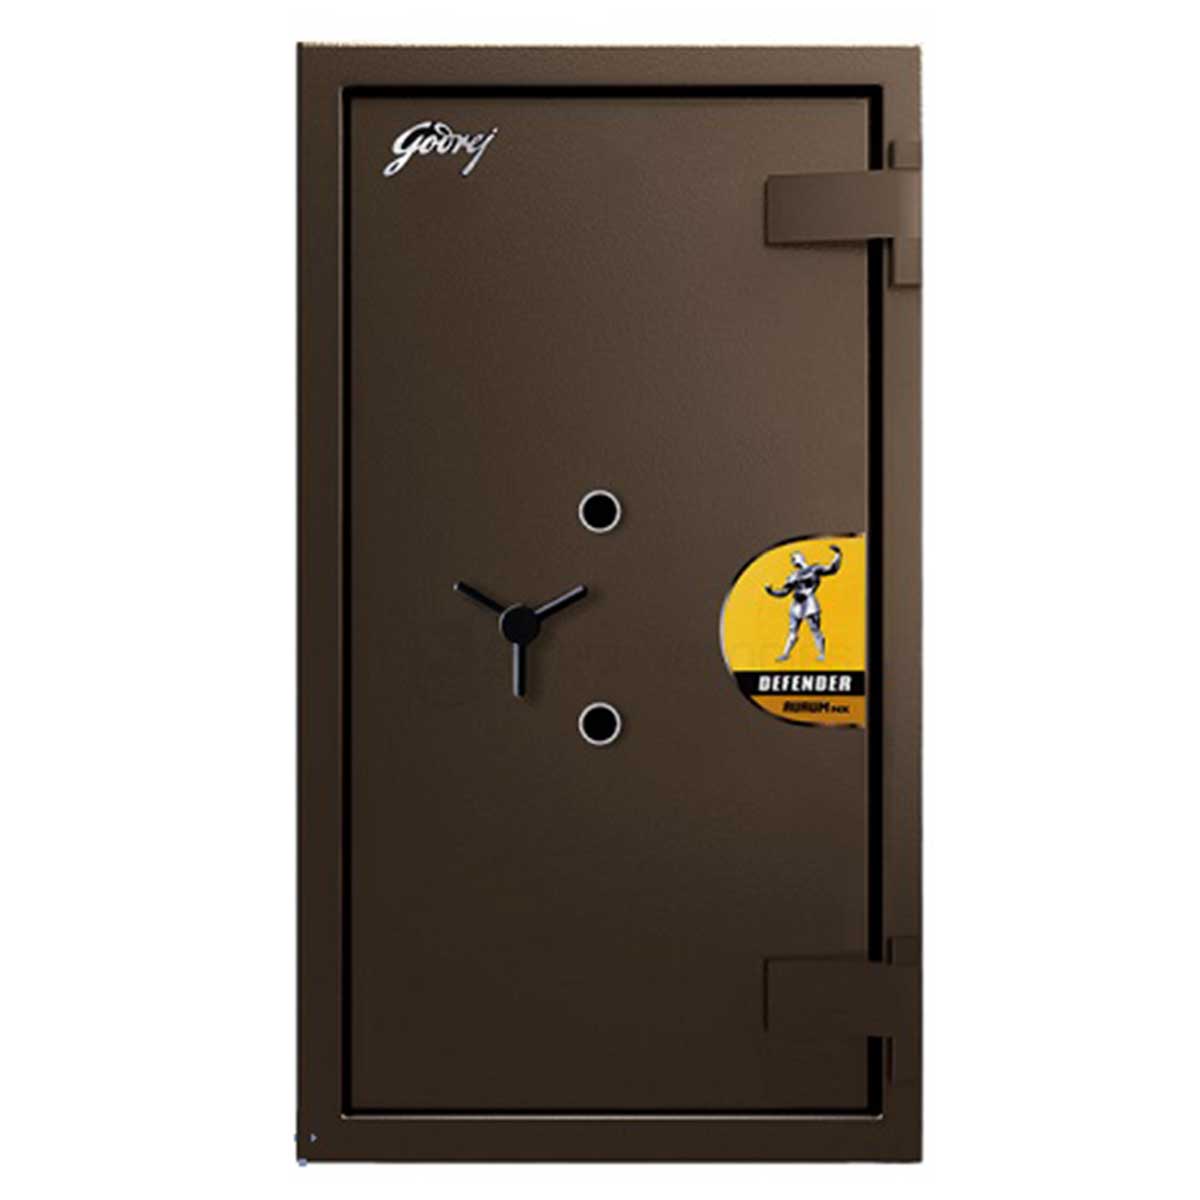 Godrej safety locker Manufacturers, Suppliers in Rohini Sector 12